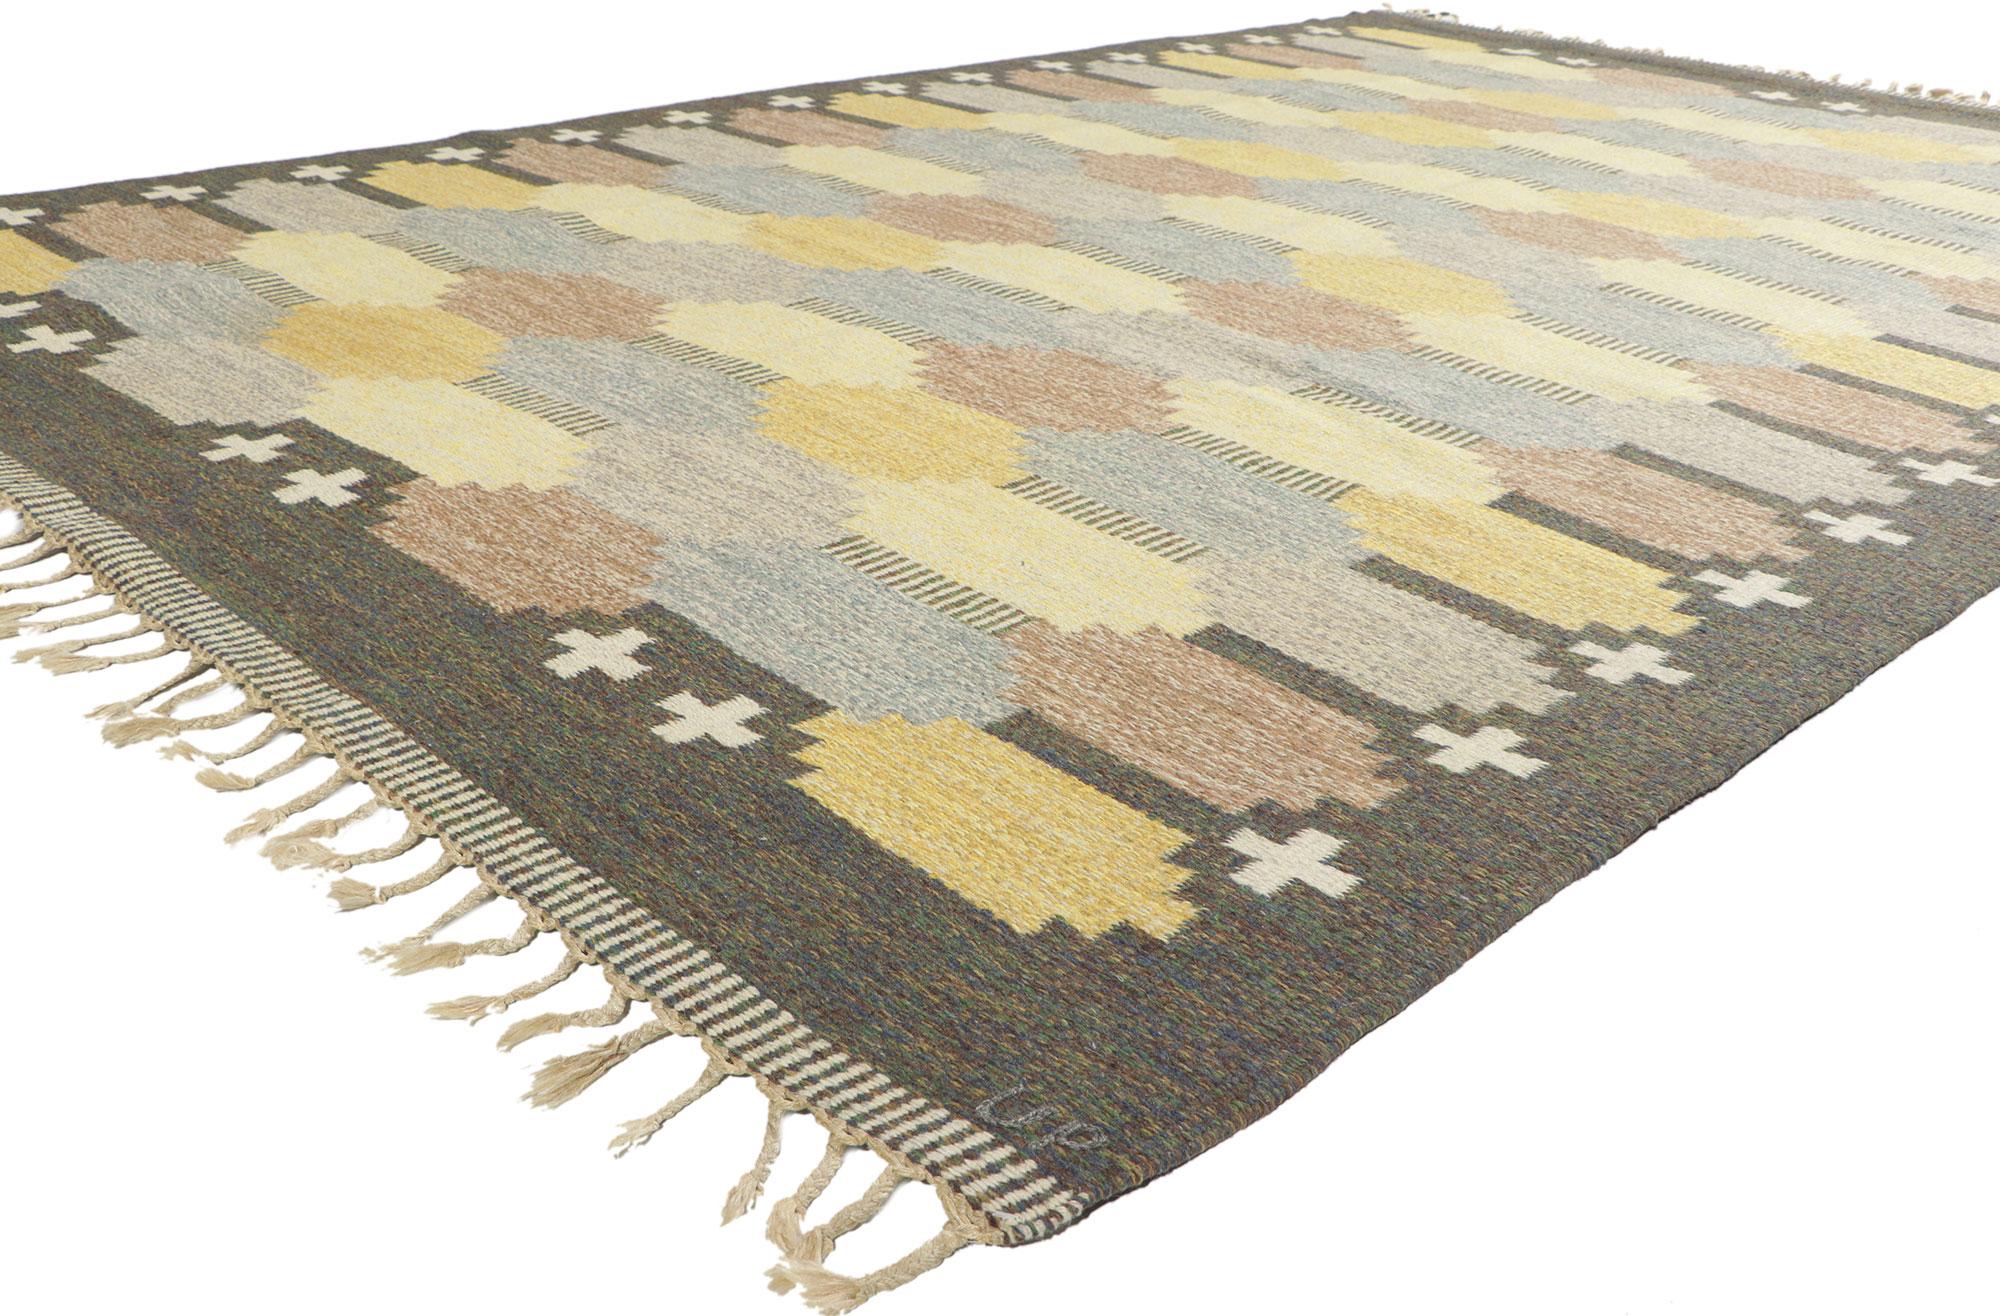 78475 vintage Swedish Rollakan rug by Ulla Parkdal, 06'06 x 10'01. With its Scandinavian Modern style, incredible detail and texture, this handwoven wool vintage Swedish rollakan rug is a captivating vision of woven beauty. The eye-catching